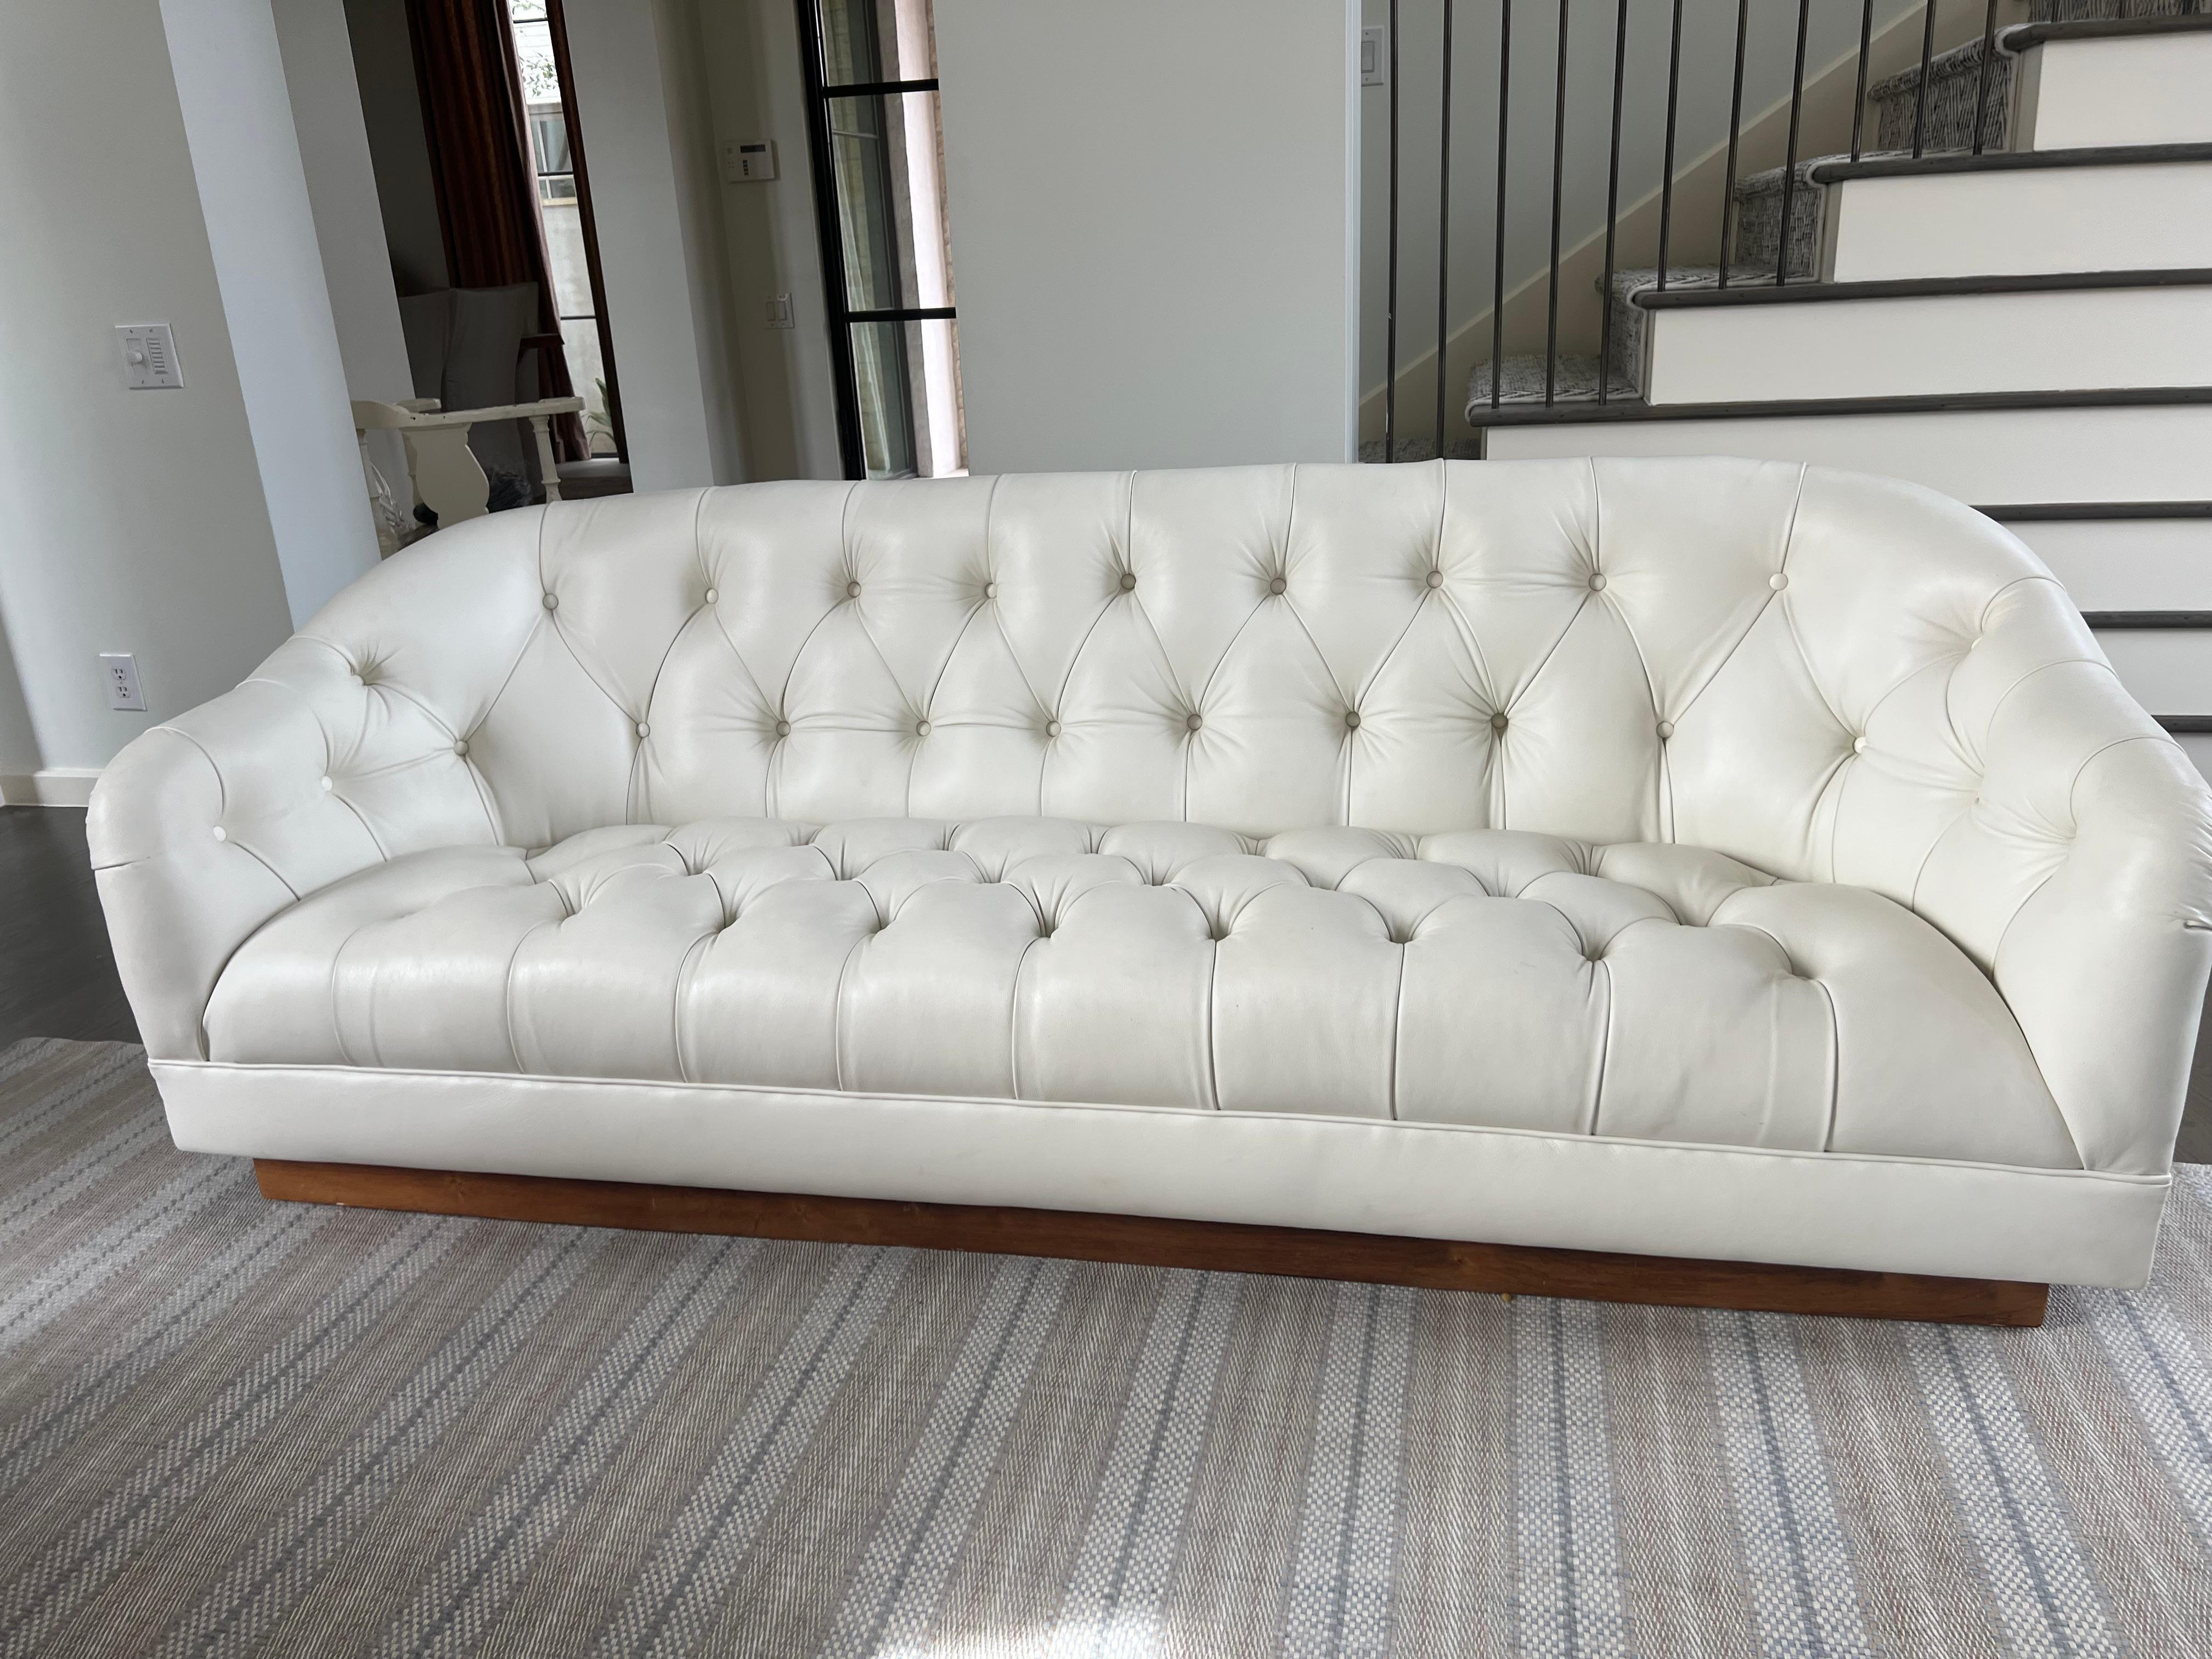 Ward Bennett Tufted Leather Sofa In Good Condition For Sale In Pasadena, TX